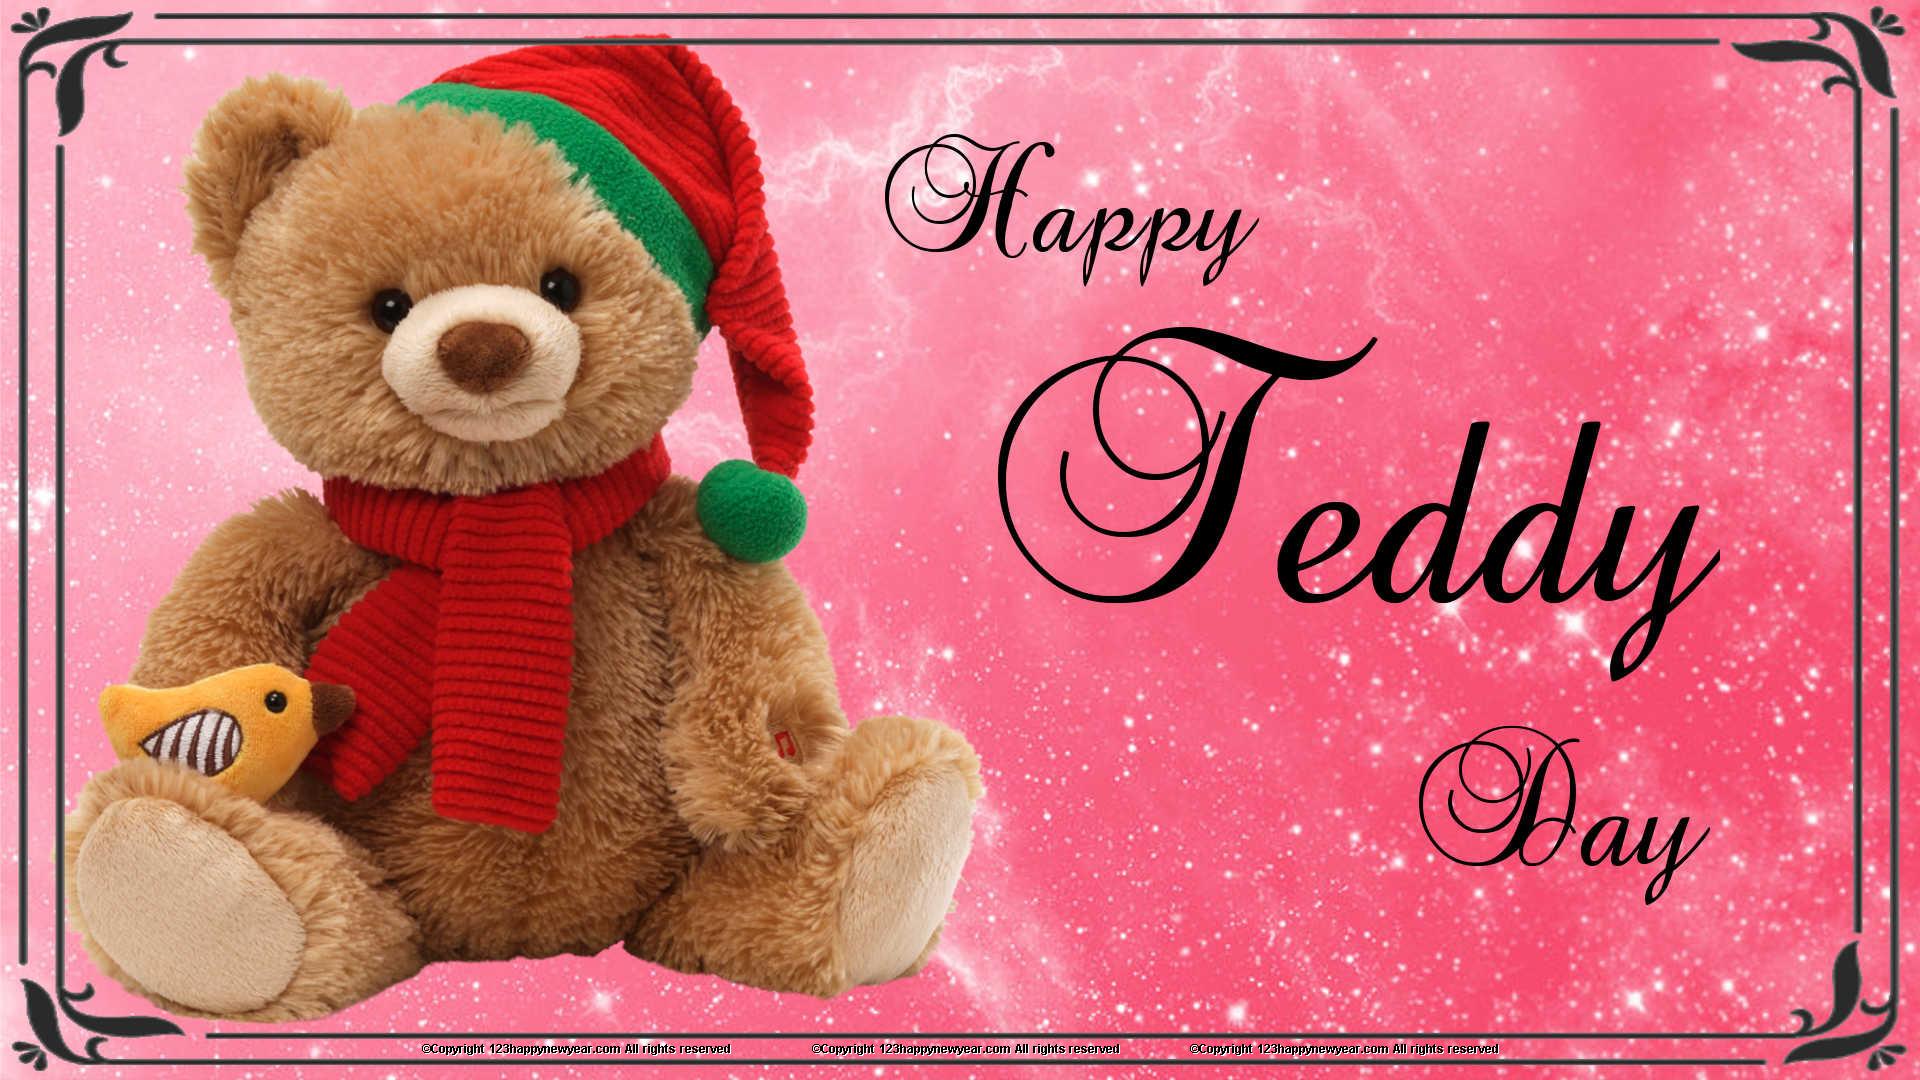 Like This Card - Toy Images On Png , HD Wallpaper & Backgrounds